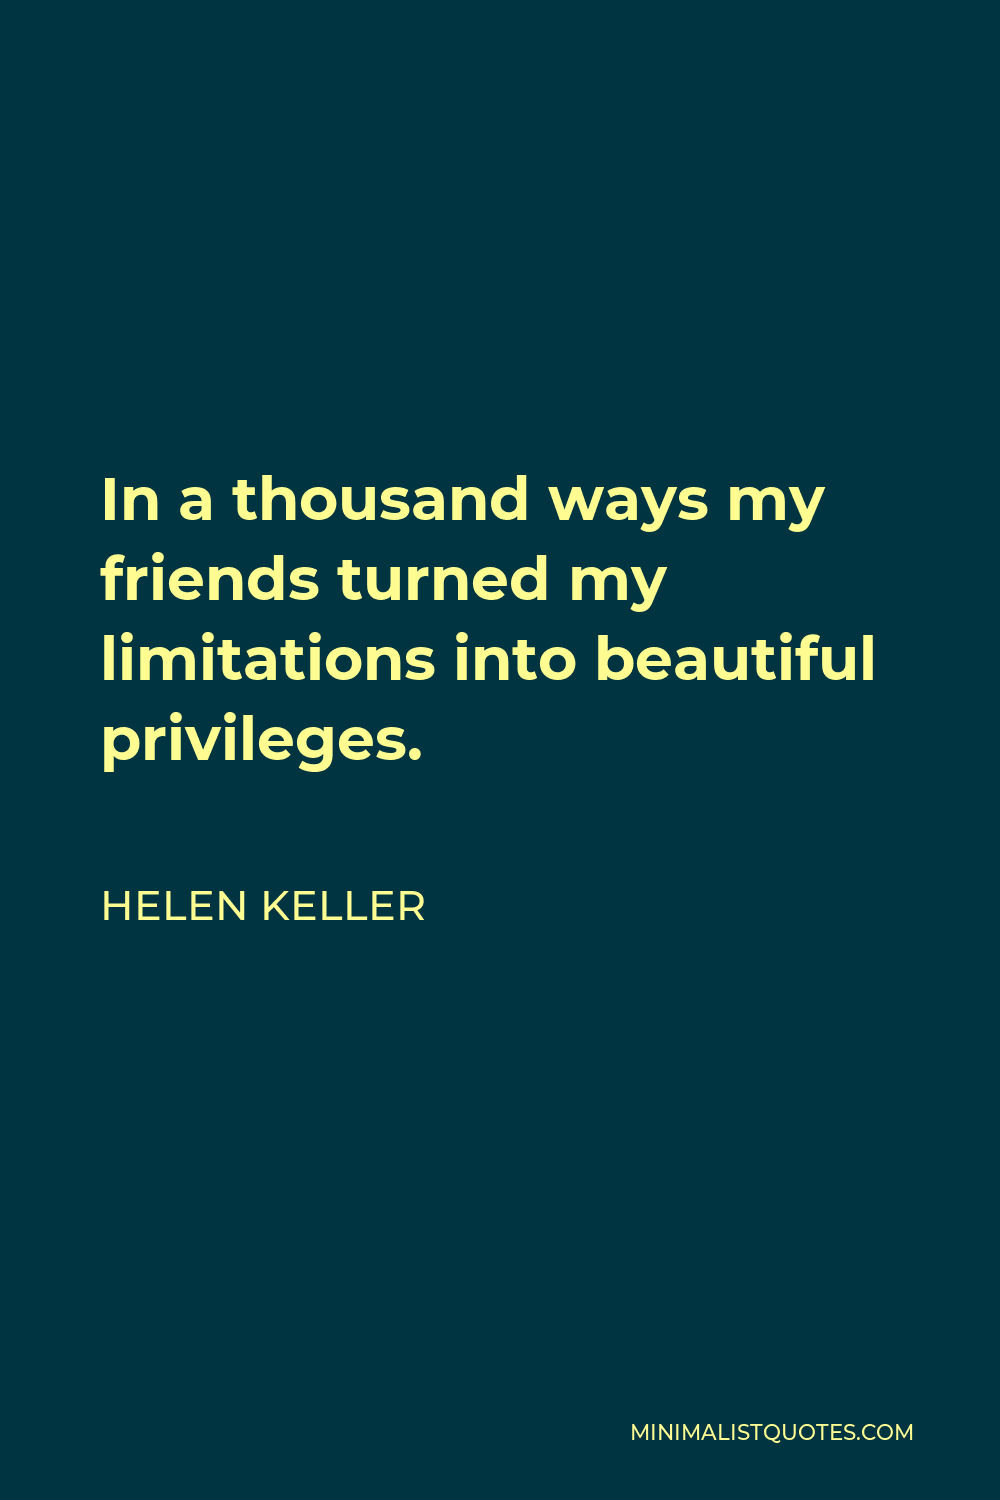 Helen Keller Quote: In a thousand ways my friends turned my limitations ...